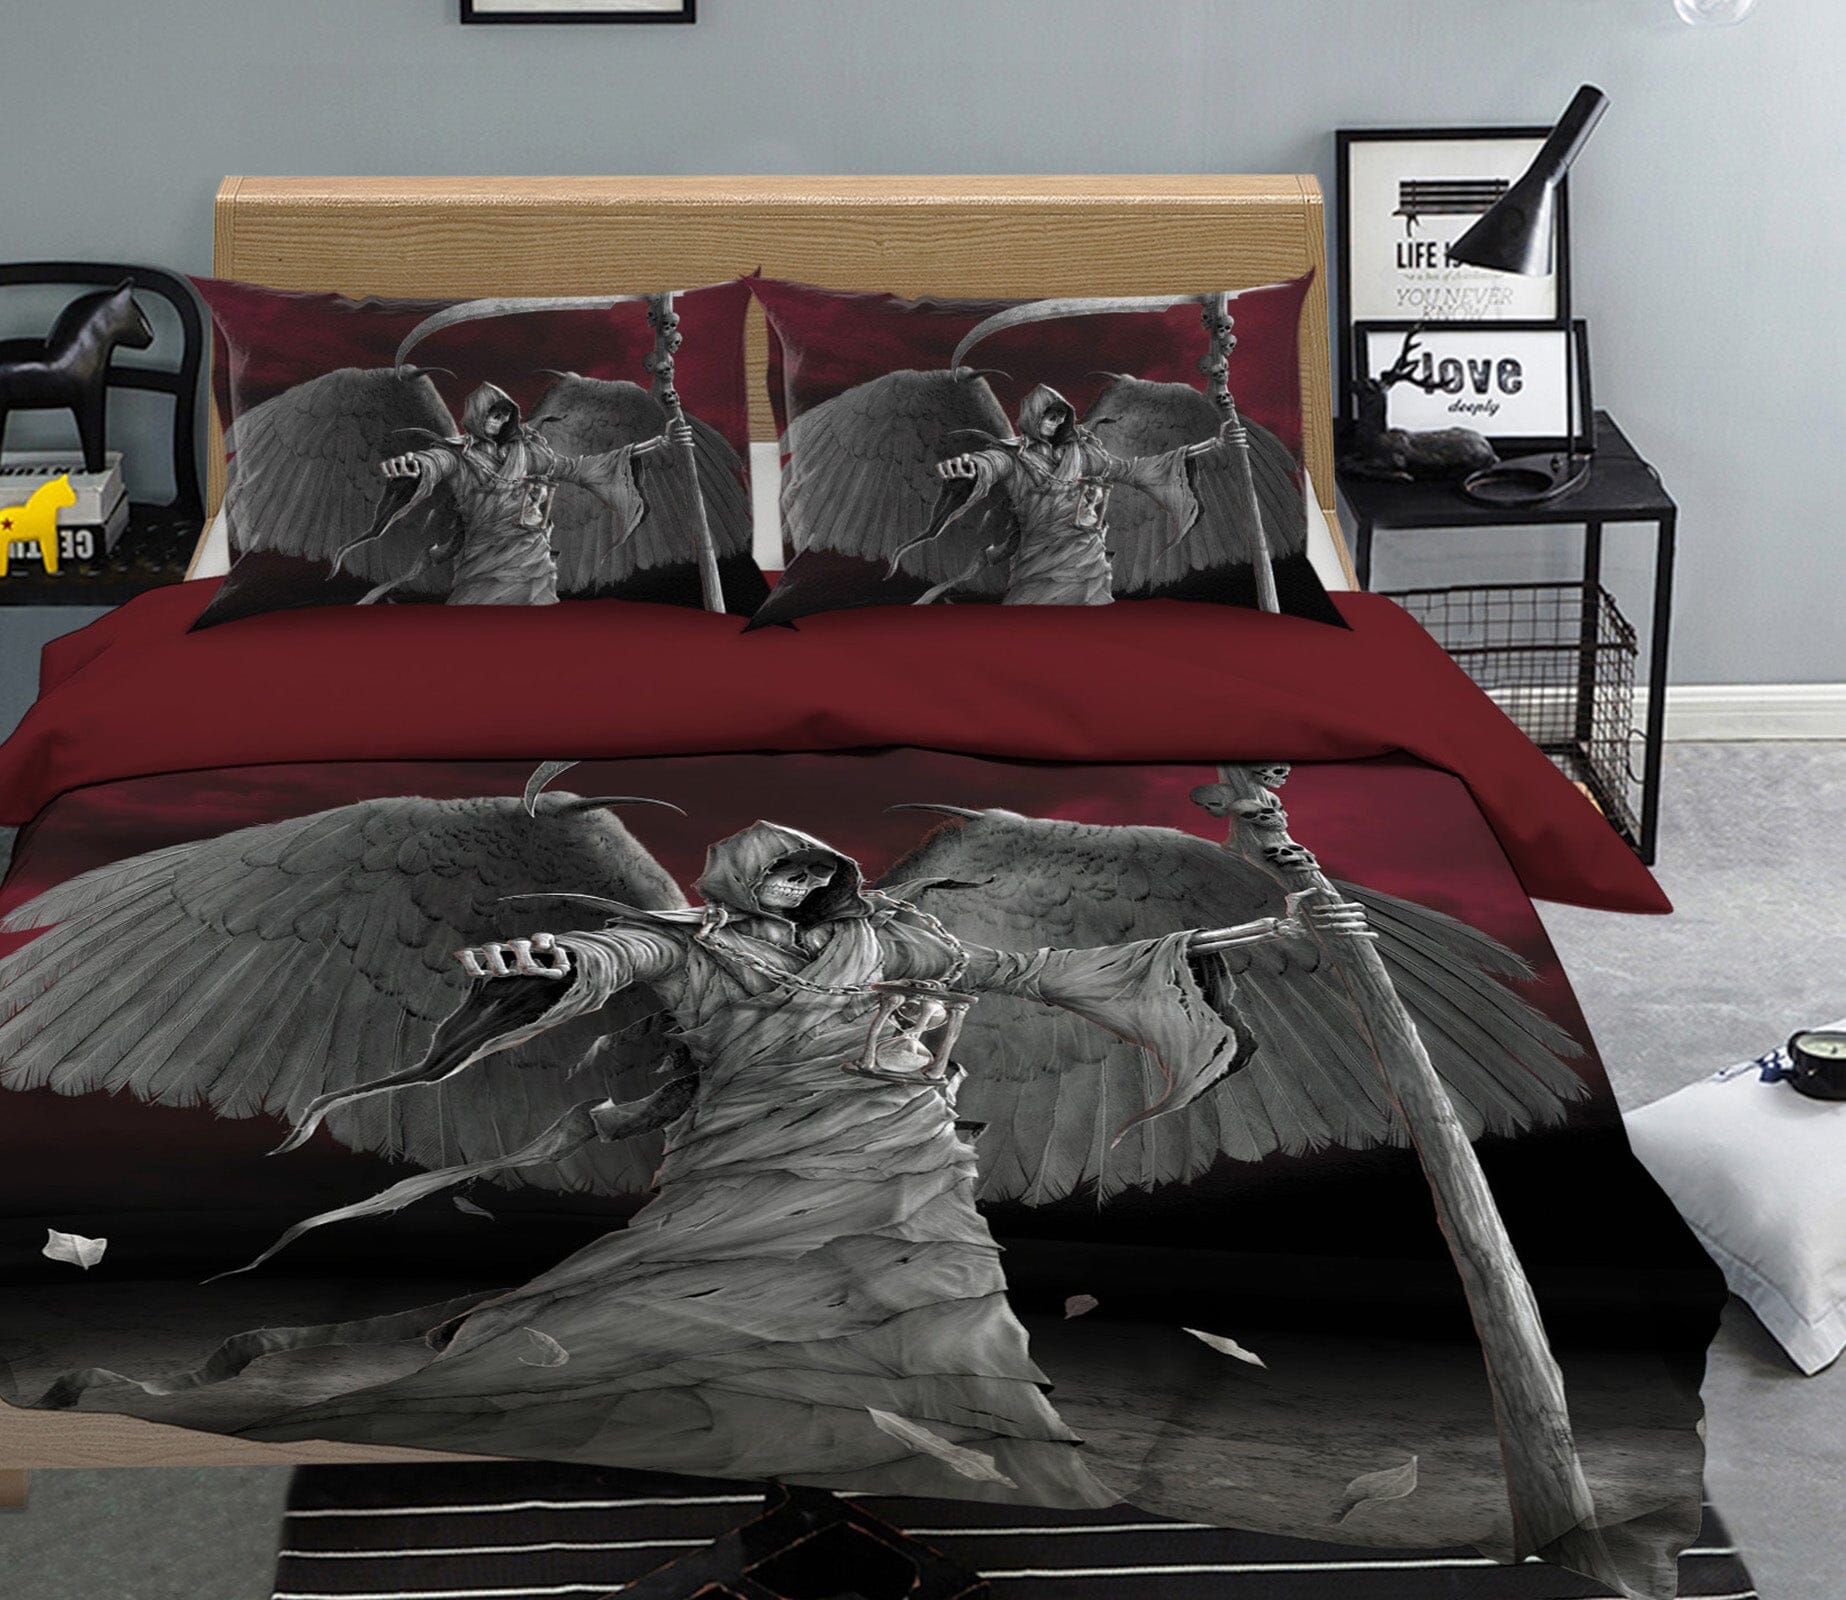 3D Time Is Up 091 Bed Pillowcases Quilt Exclusive Designer Vincent Quiet Covers AJ Creativity Home 